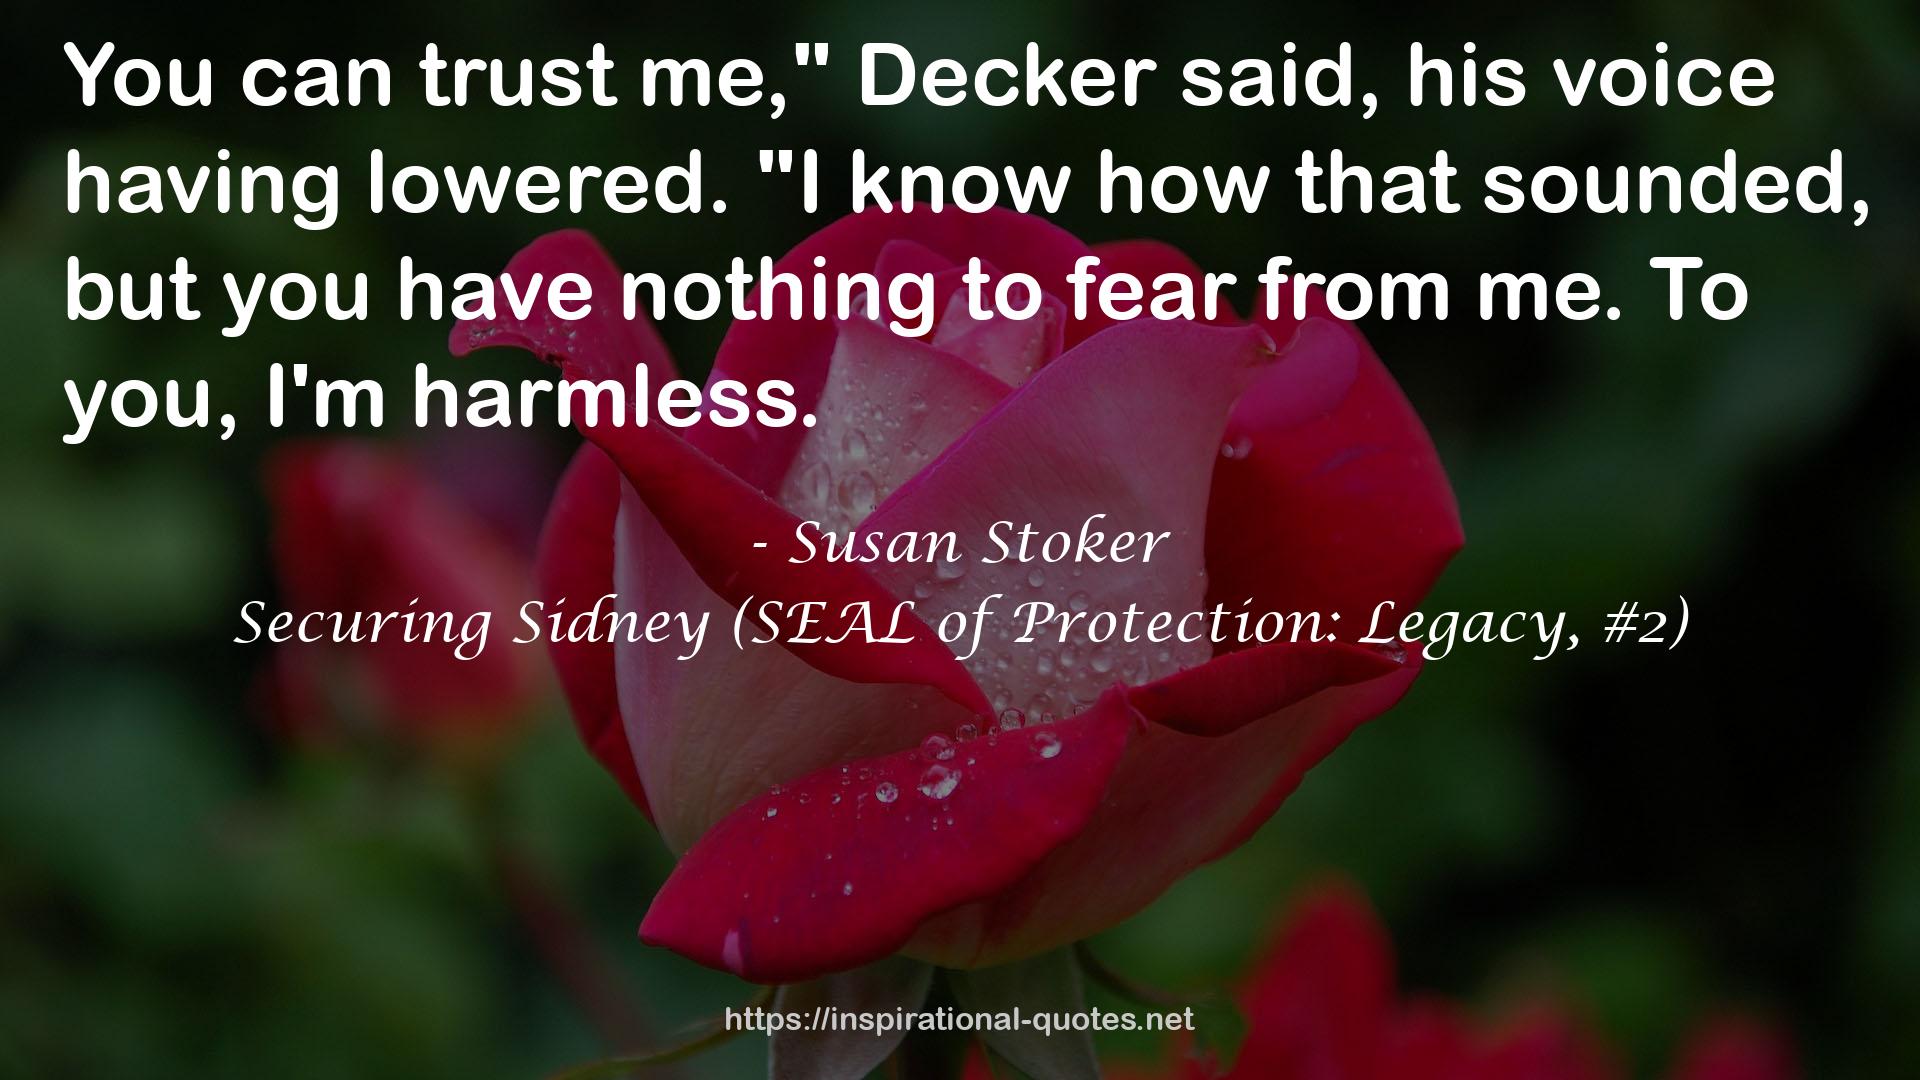 Securing Sidney (SEAL of Protection: Legacy, #2) QUOTES